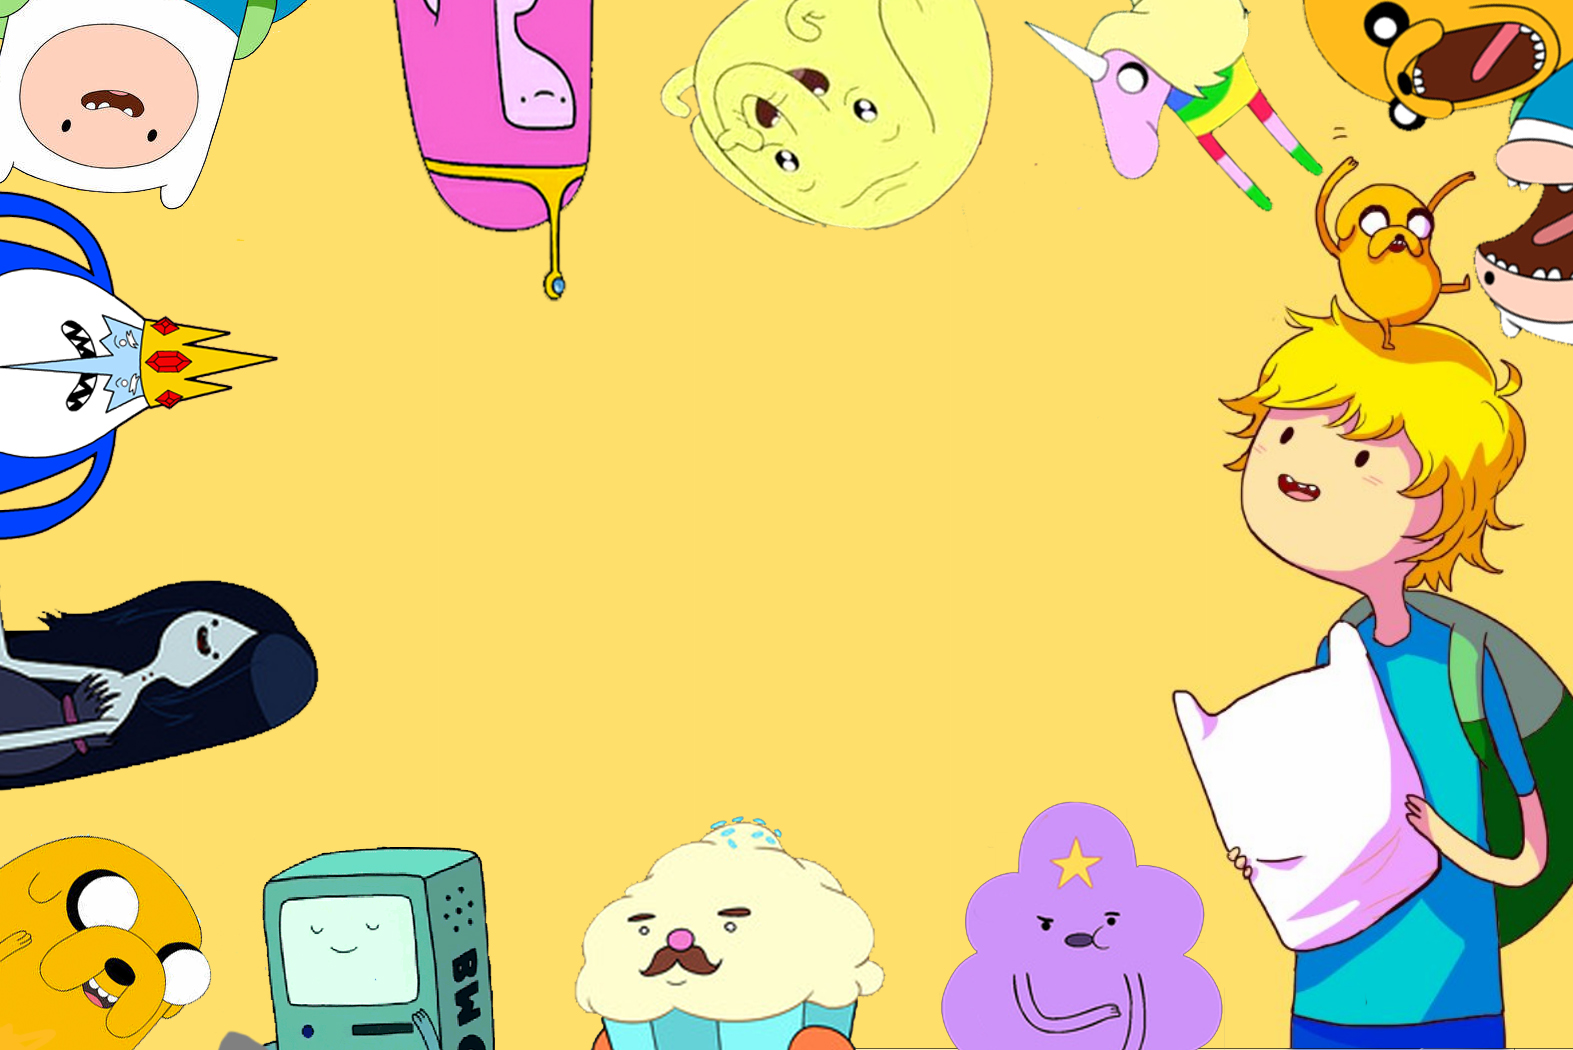 Drawn Jake And Finn Adventure Time Android Wallpaper - Cartoon